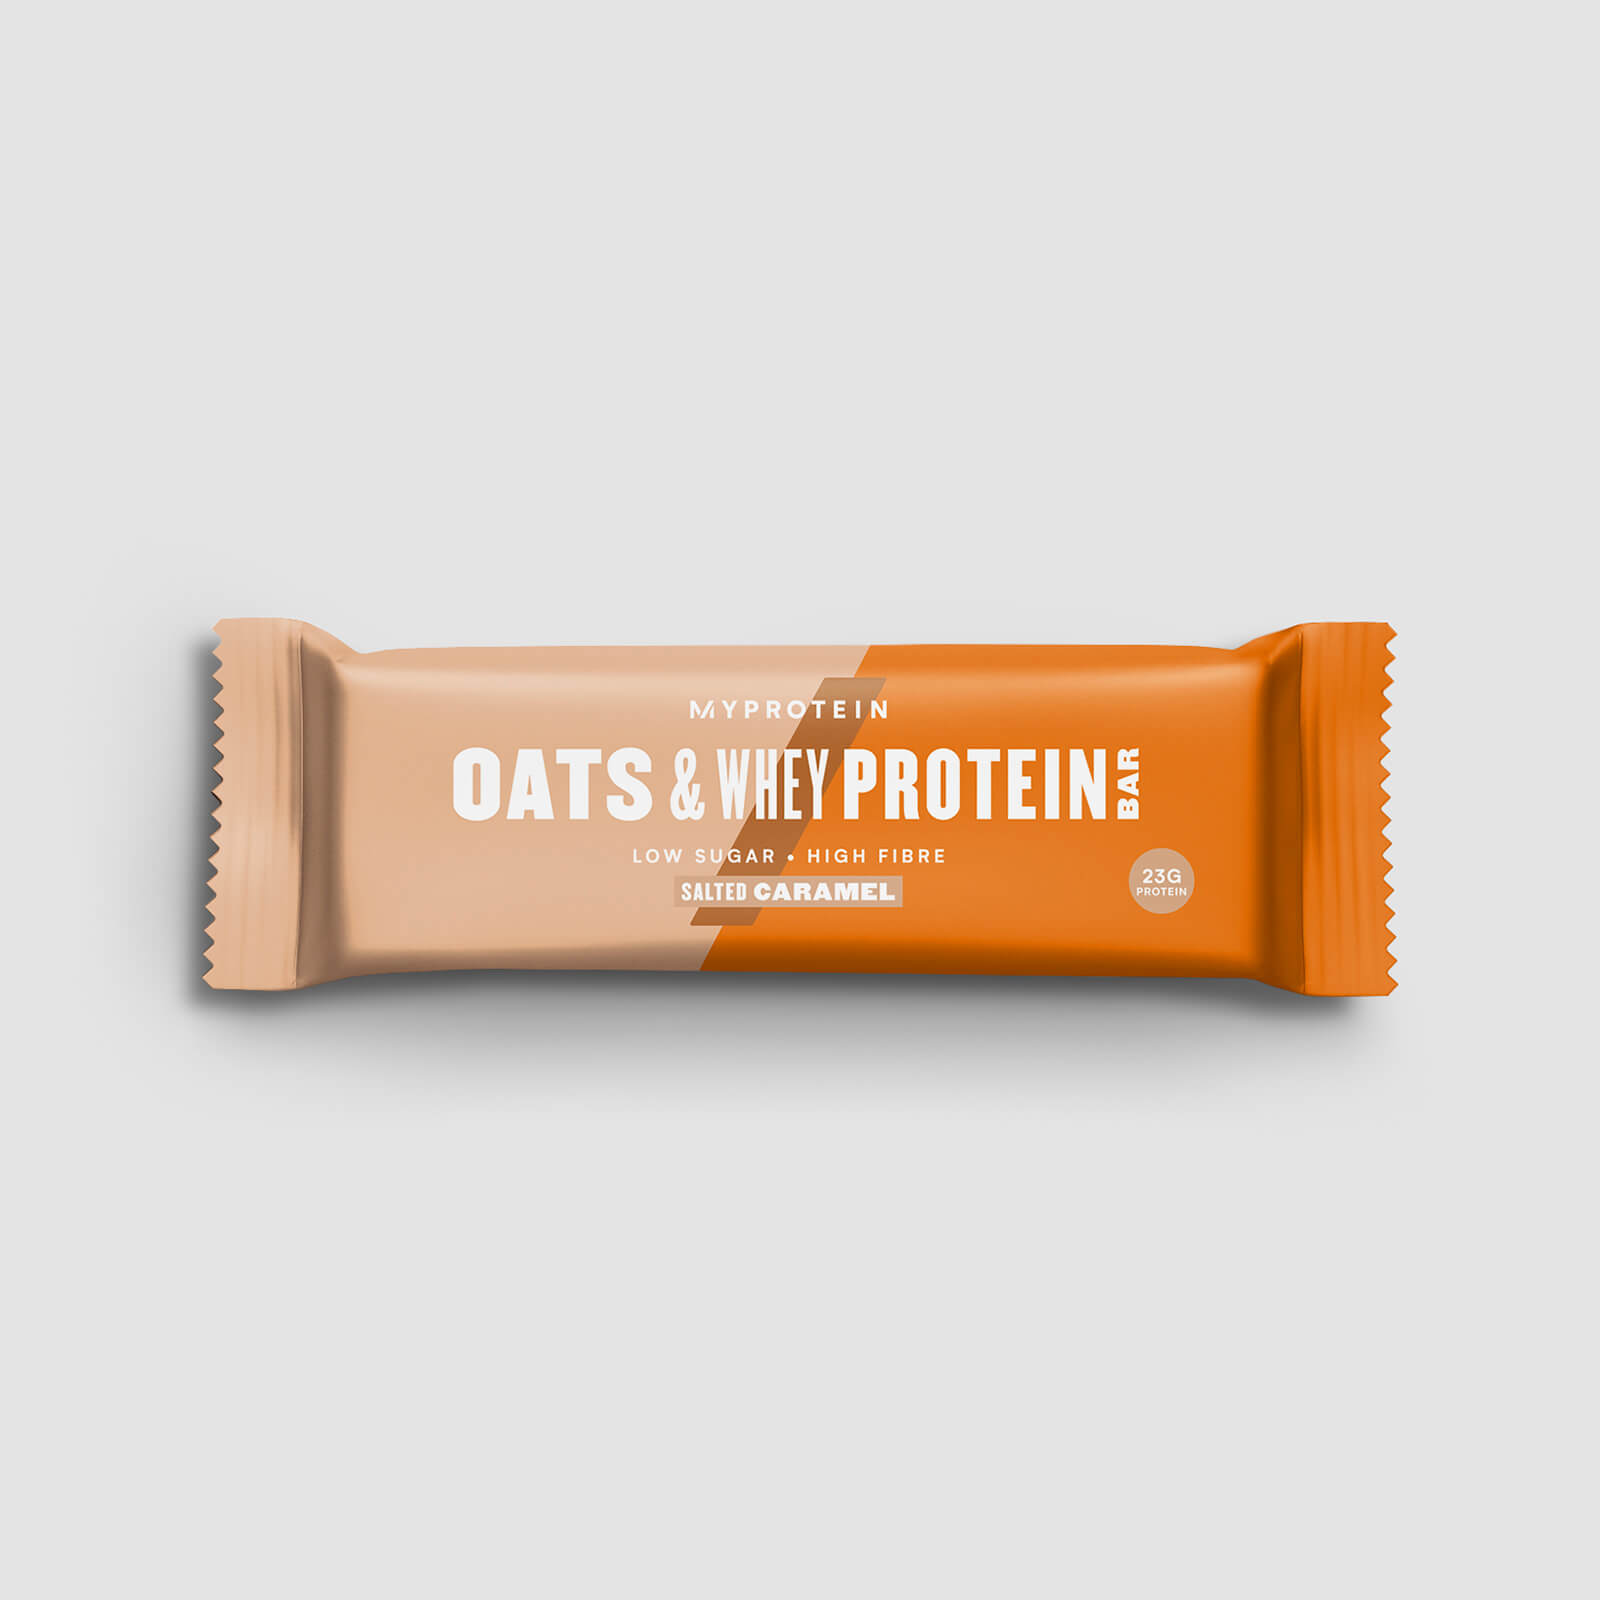 Myprotein Oats & Whey Protein Bar - Ny - Salted Caramel